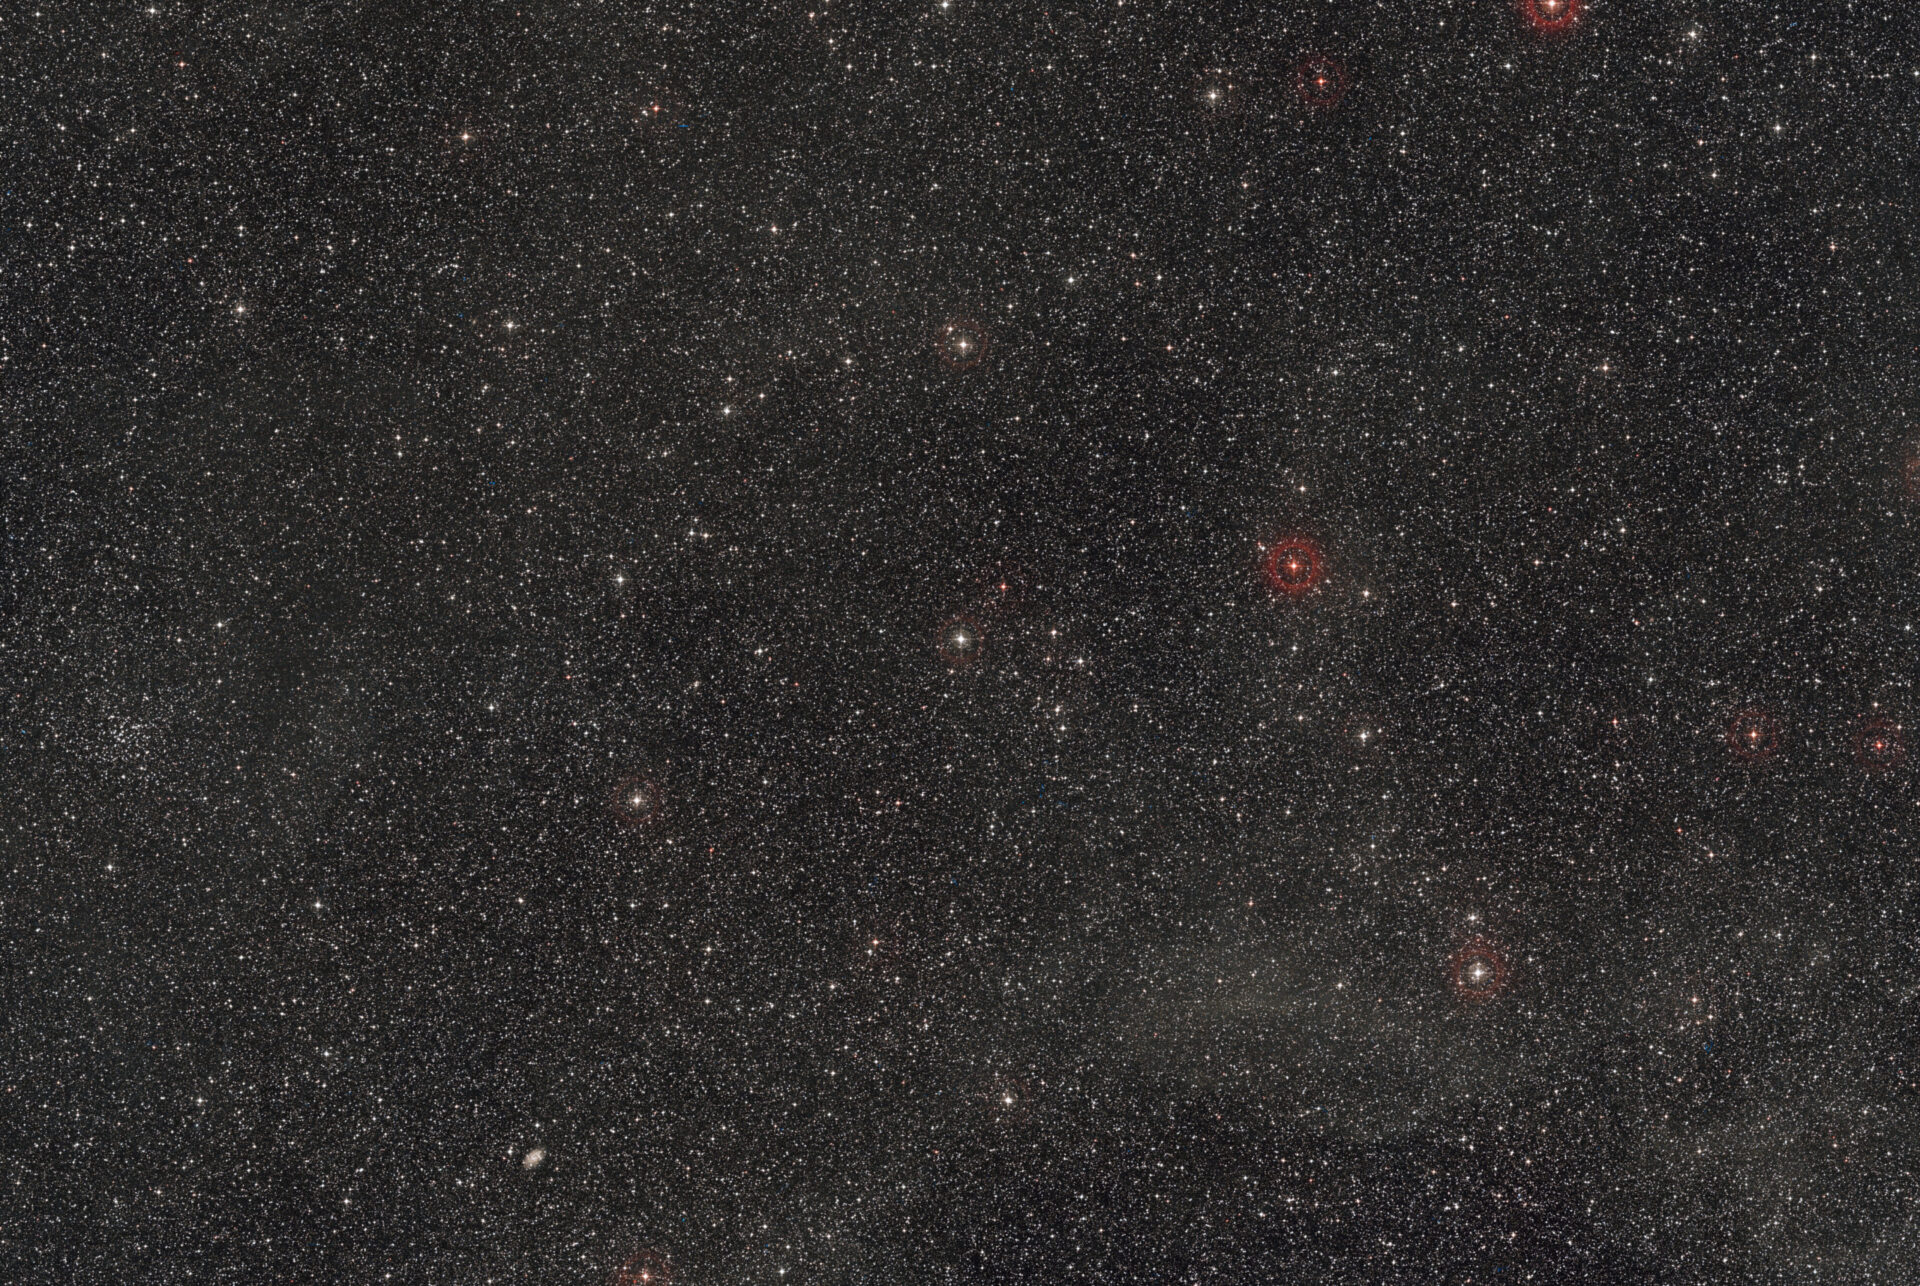 Wide-field view of the region of the sky where HD101584 is locat